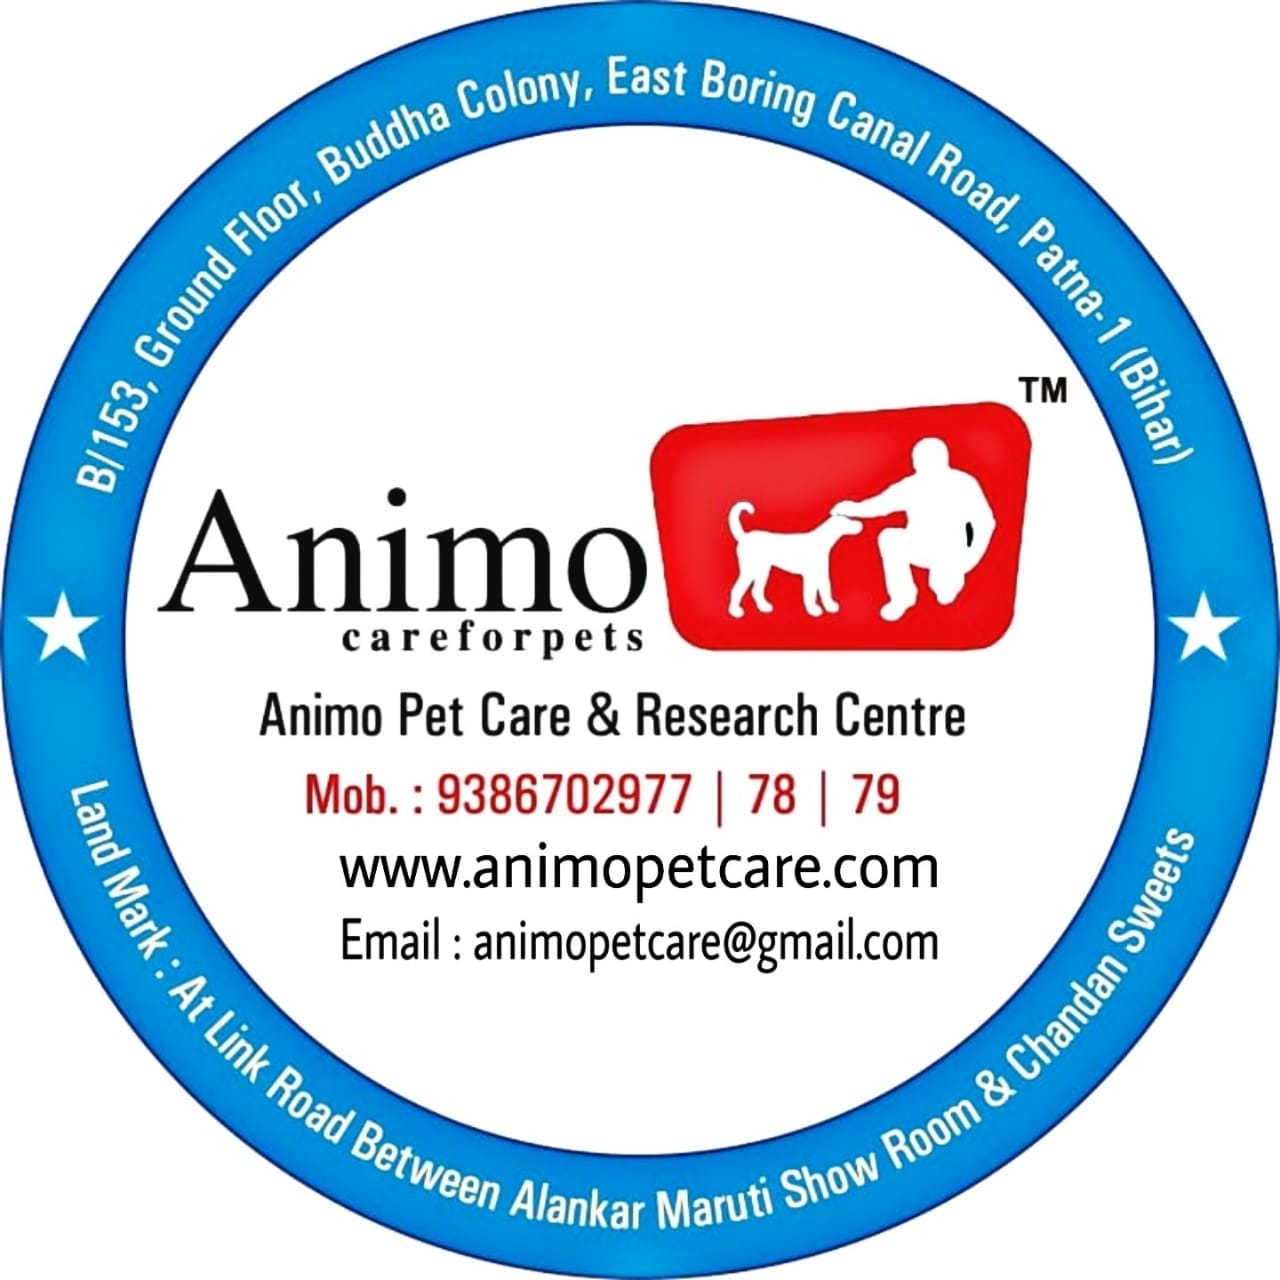 Animo Pet Care|Veterinary|Medical Services